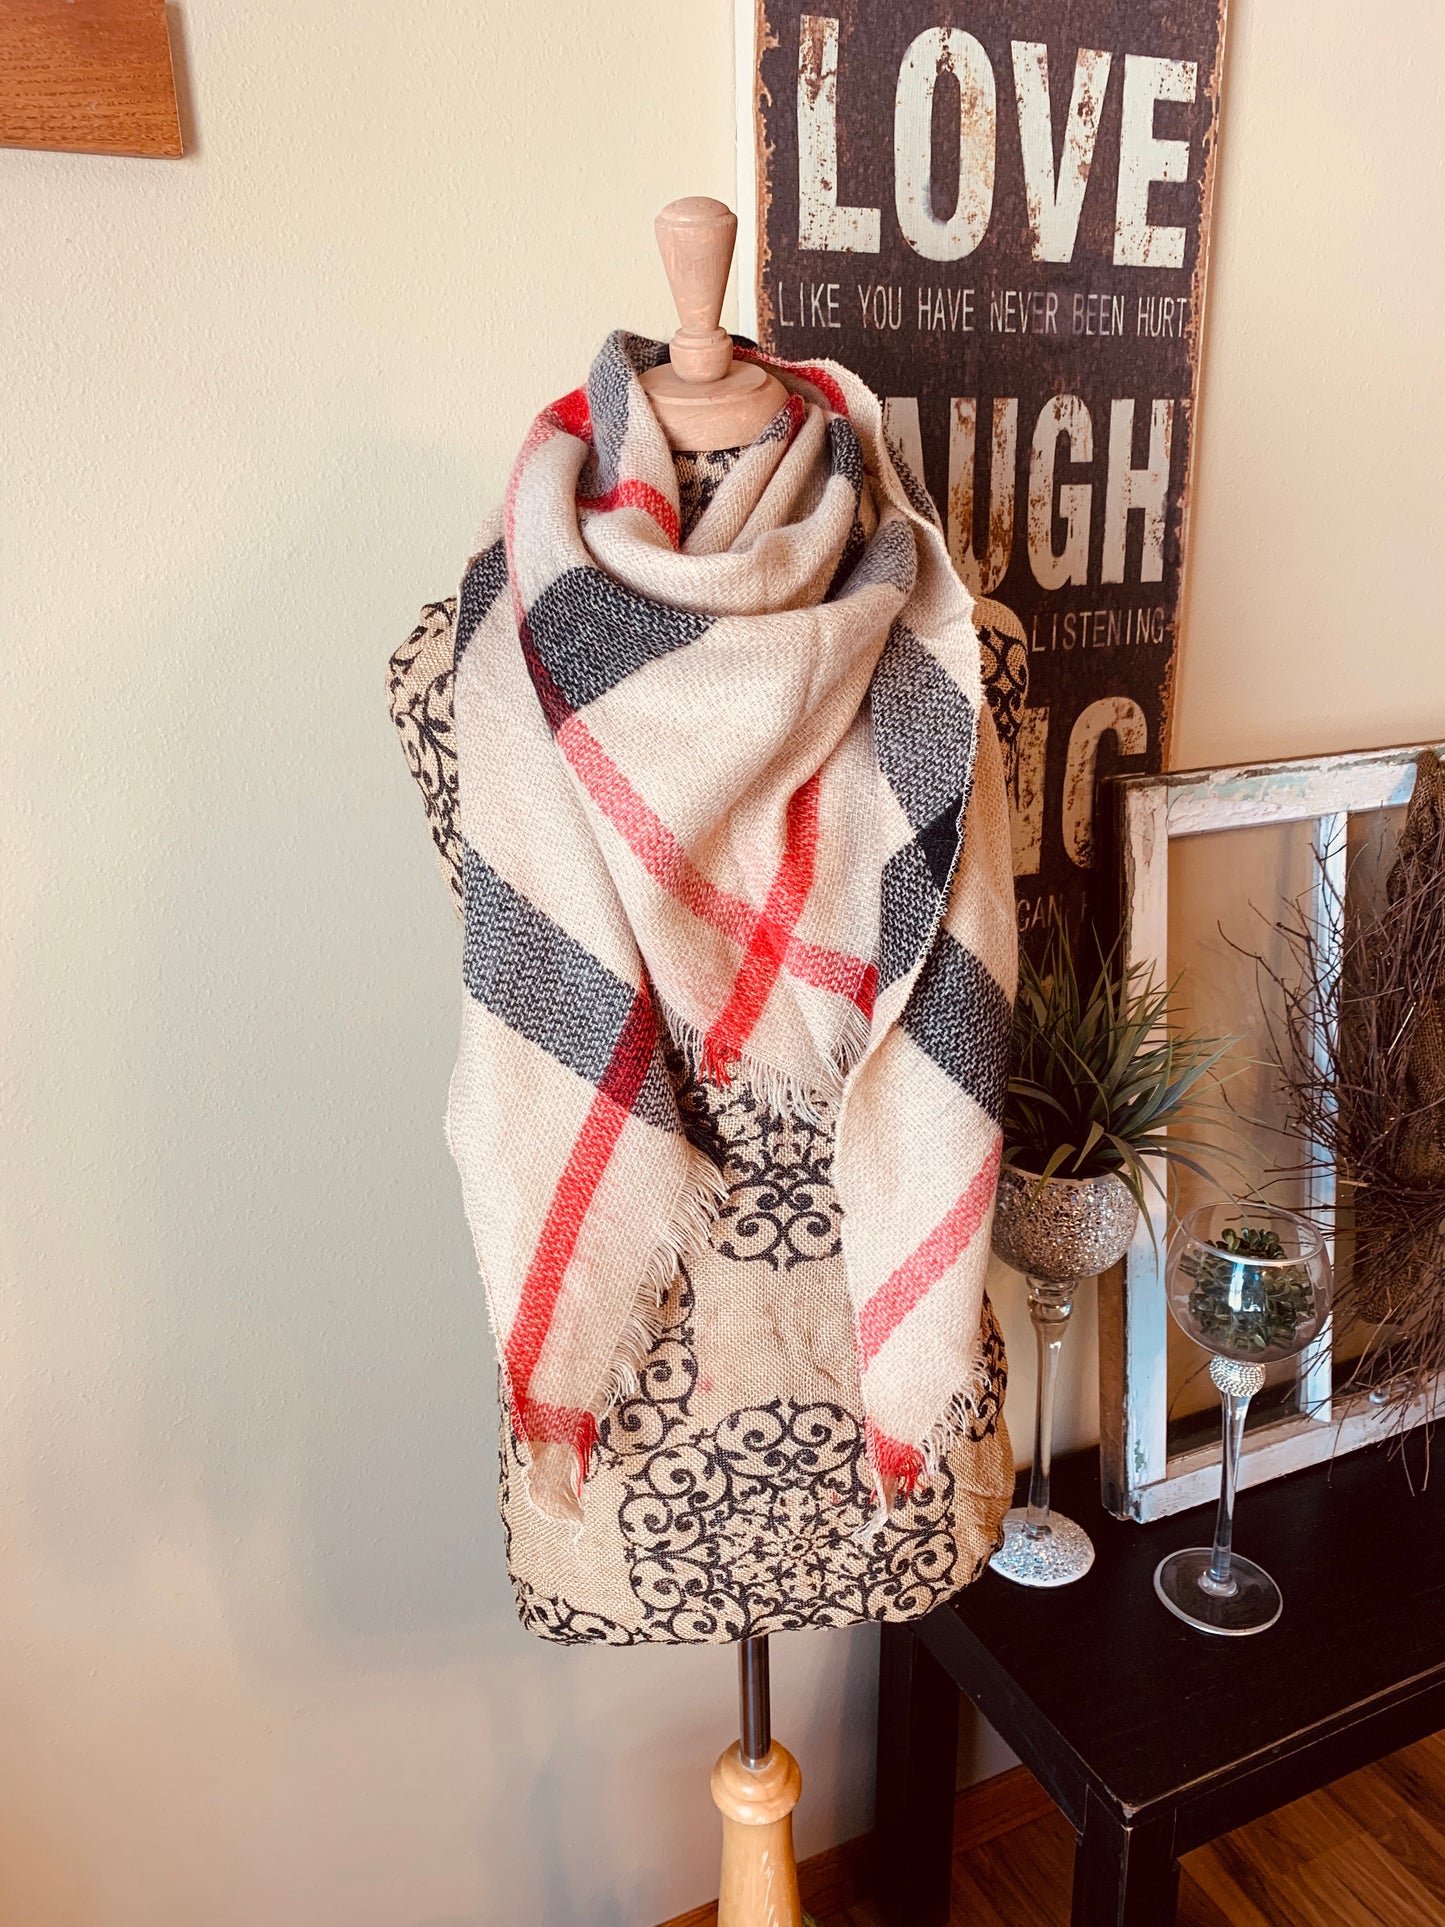 { Blanket scarf } Triangle shape. Not as large as the huge blanket scarves. - Stacy's Pink Martini Boutique